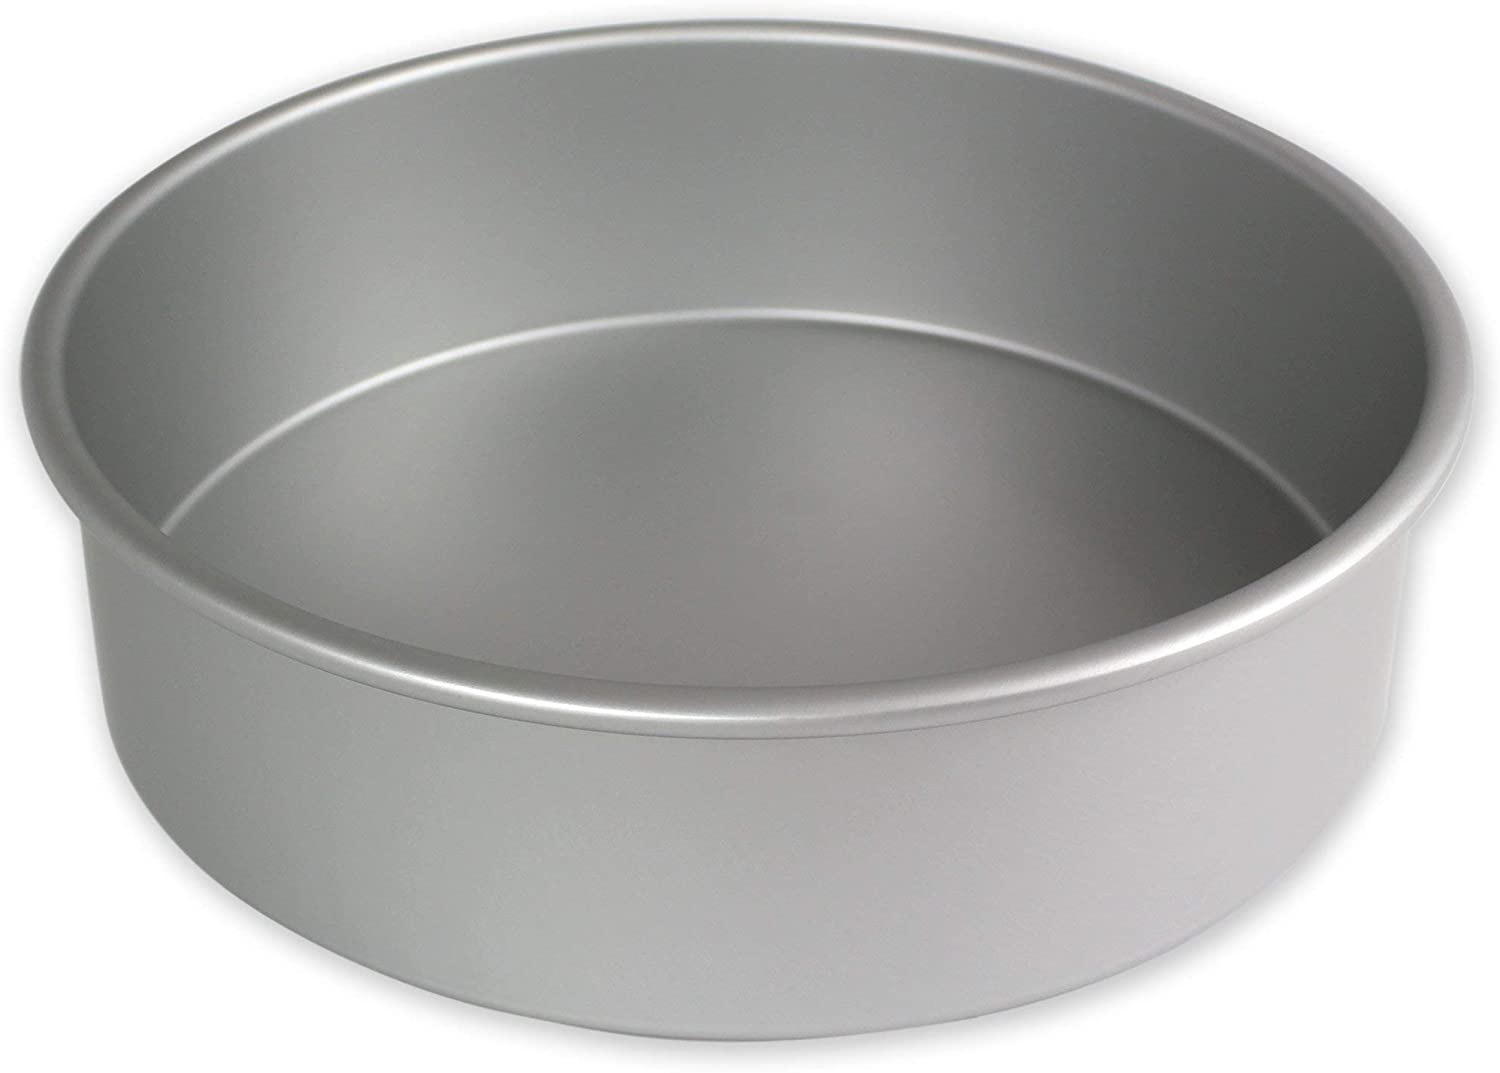 PME Rounded Cake Pans (4 in Height)